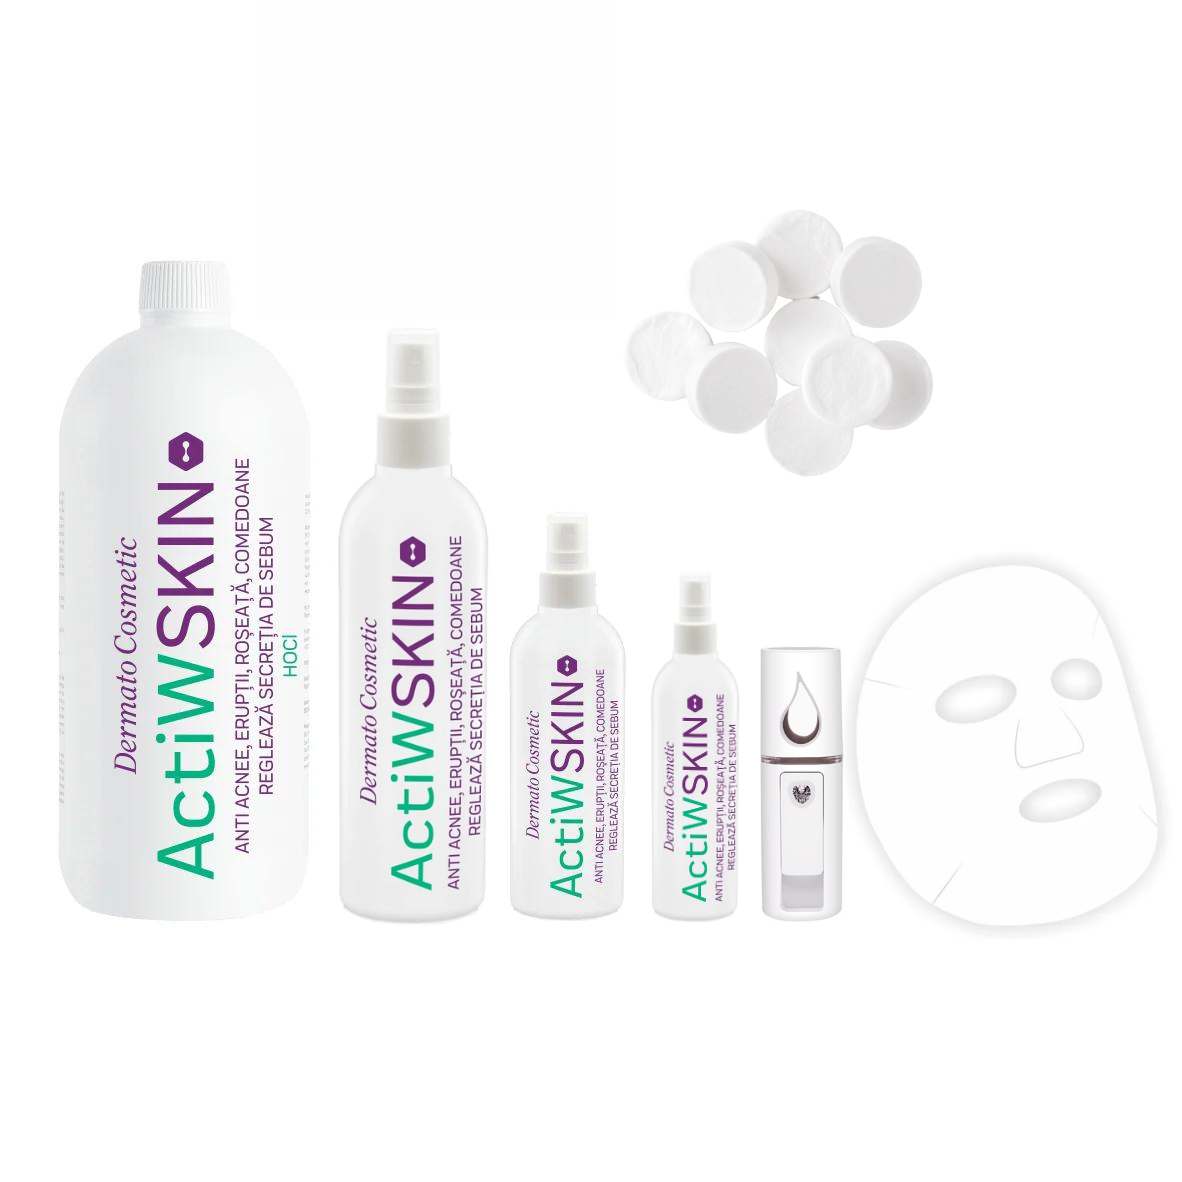 ACTIW SKIN ANTI ACNEE PACHET COMPLET TRATAMENT 